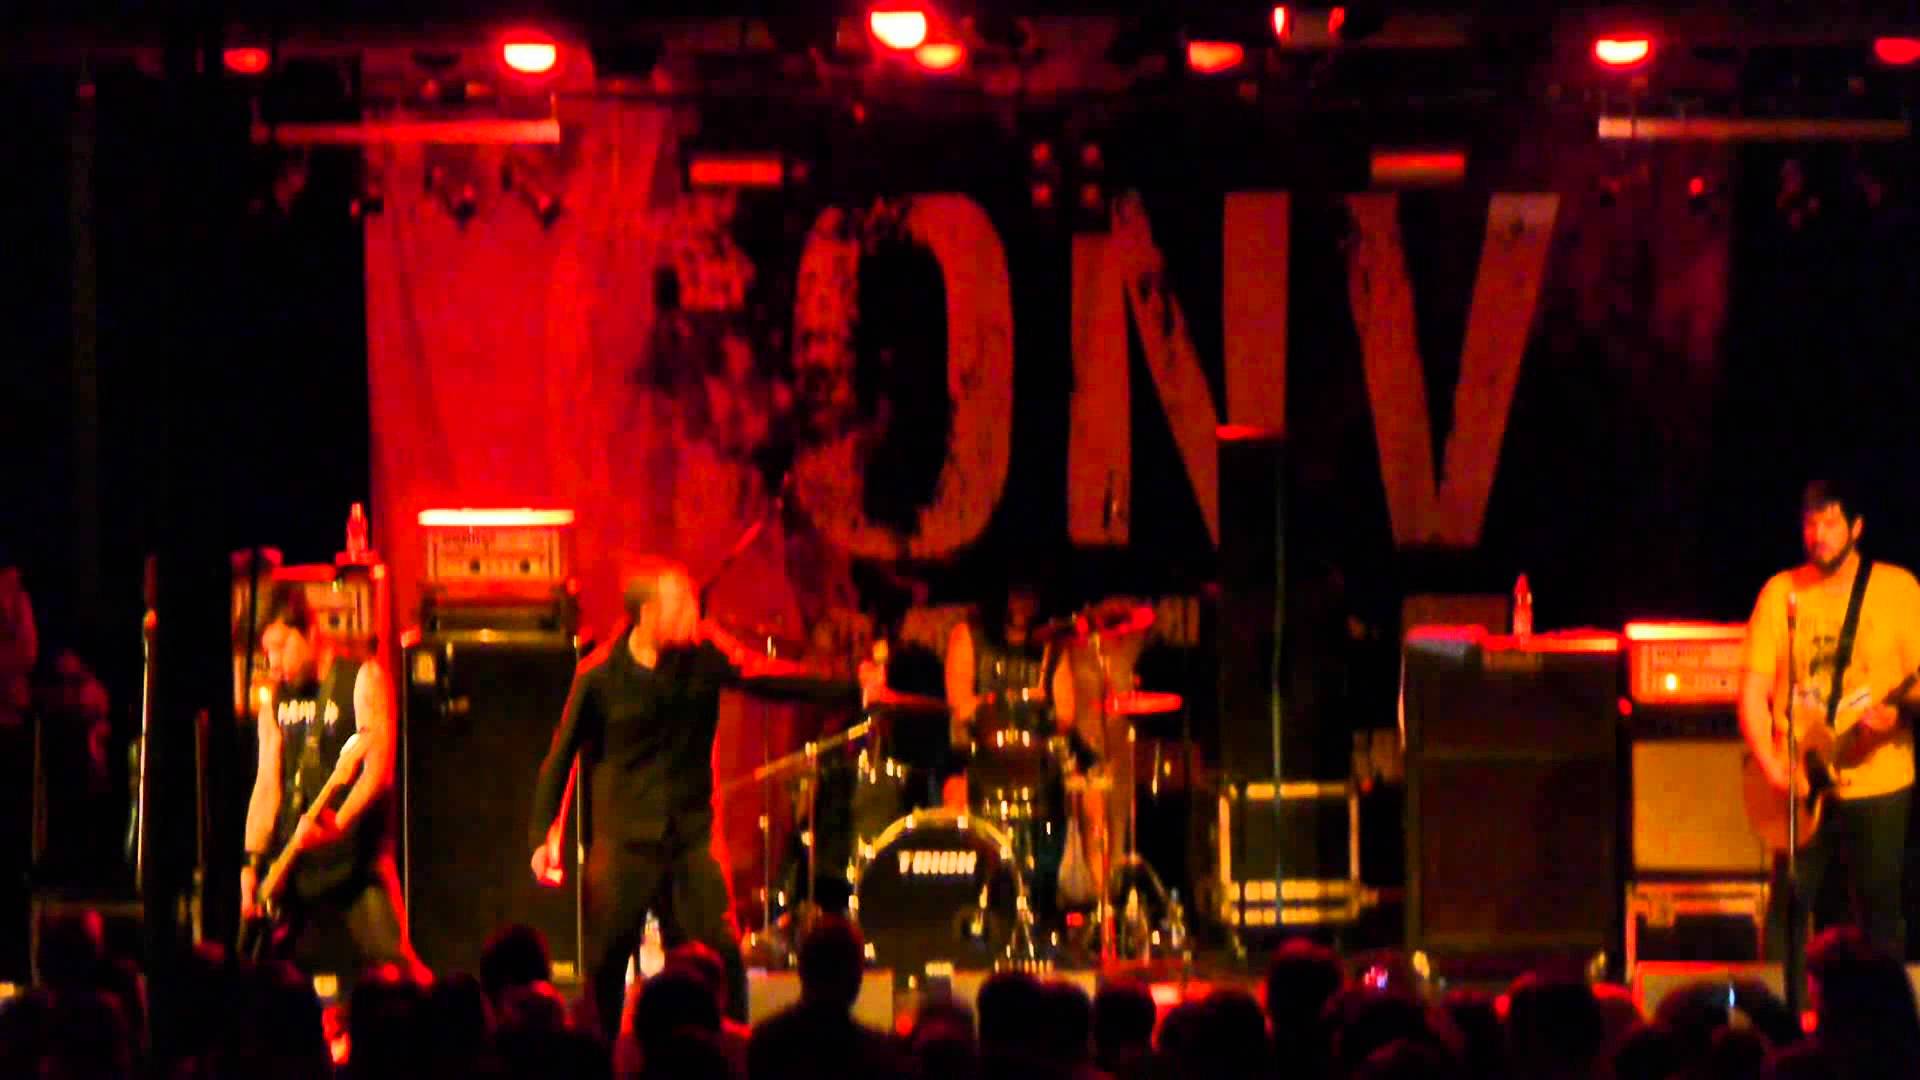 converge - live @ the SUBSTAGE club germany - no heroes tour - YouTube